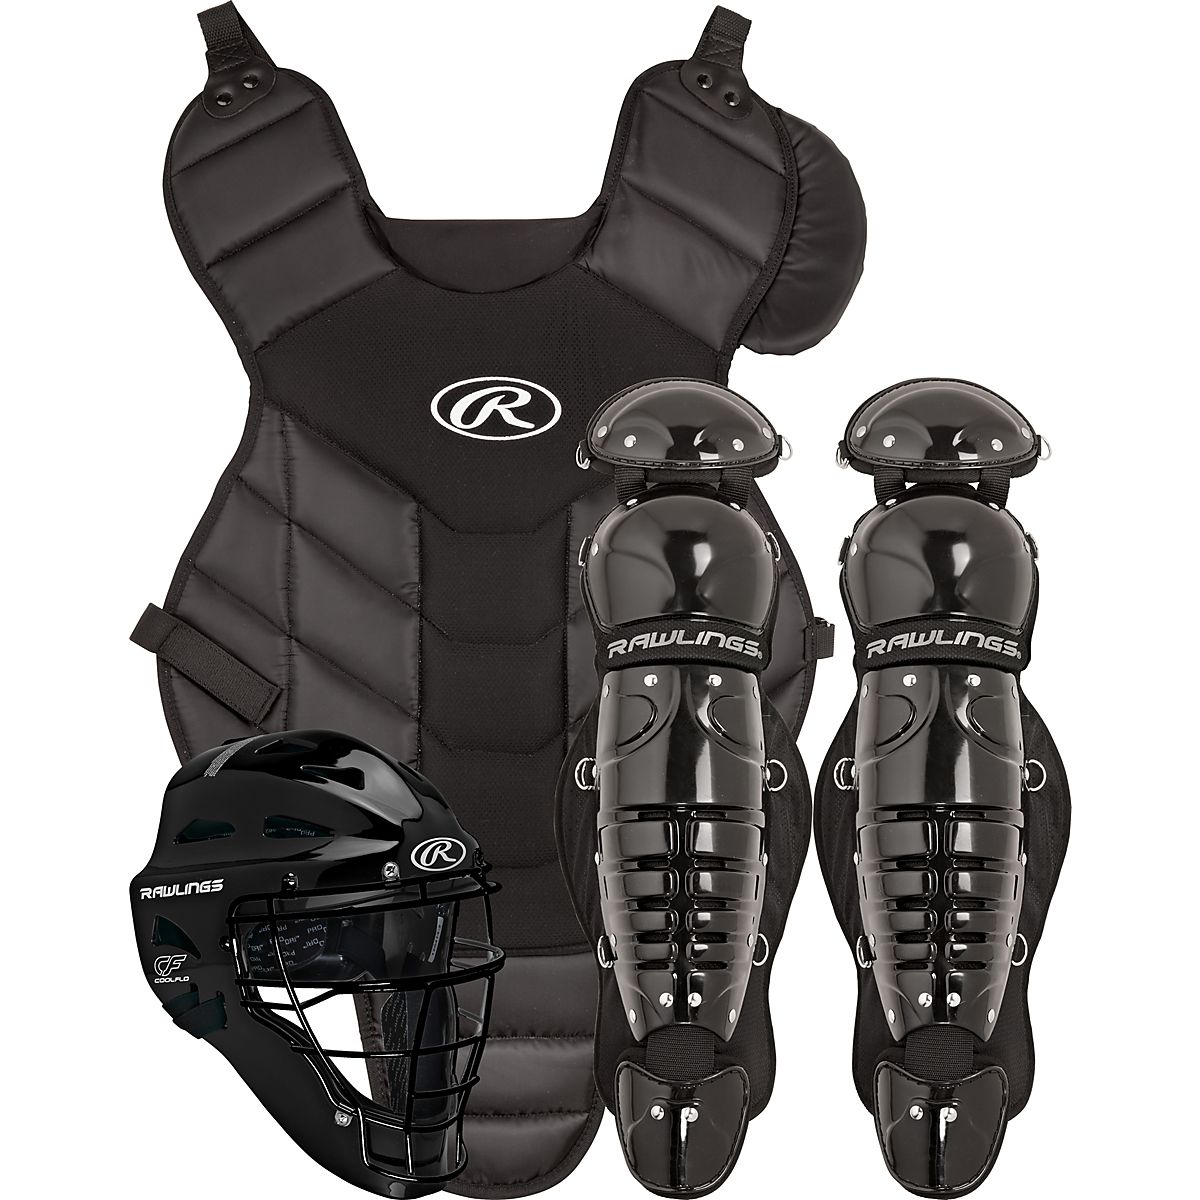 Rawlings Player's PLCSY Youth Baseball Catcher's Gear Set